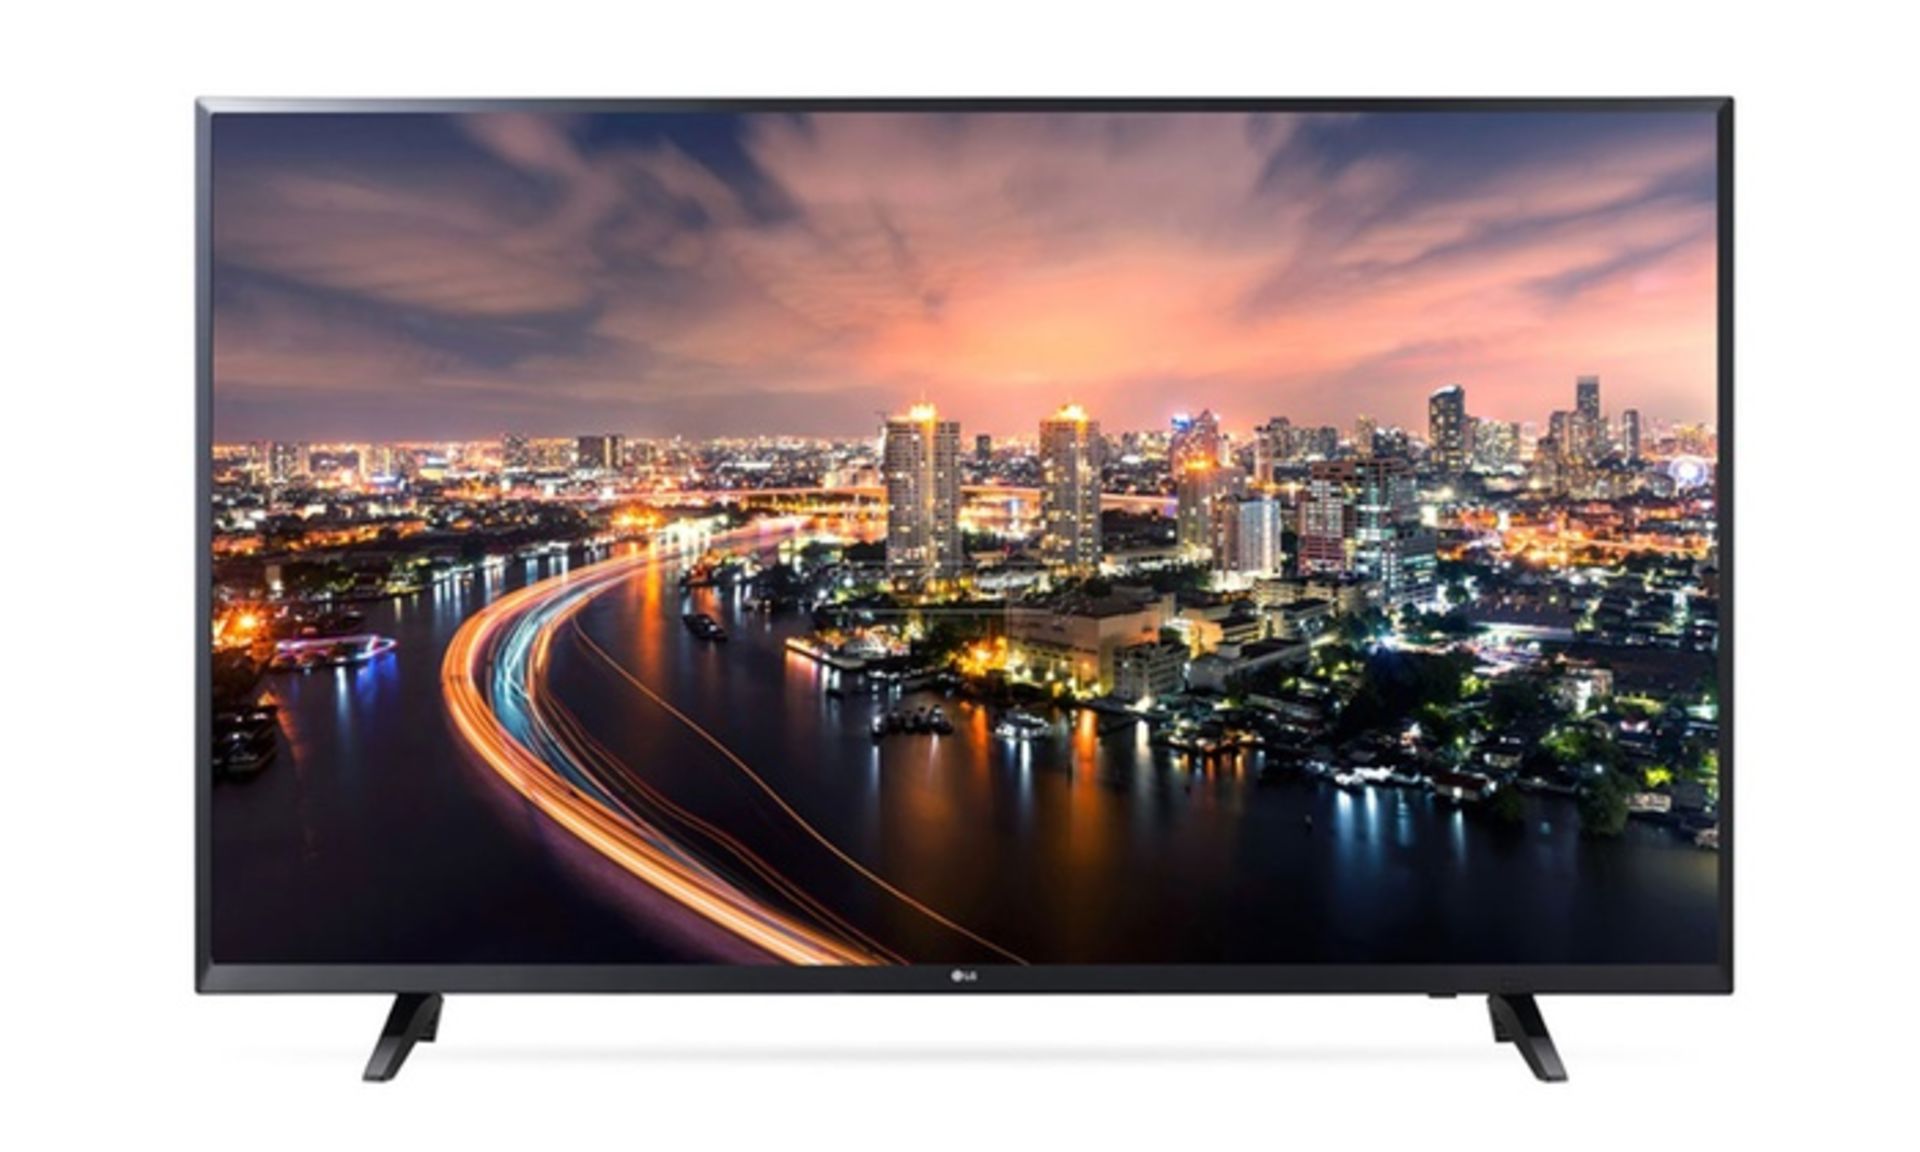 V Grade A LG 43 Inch ACTIVE HDR 4K ULTRA HD LED SMART TV WITH FREEVIEW & WEBOS & WIFI 43UJ620V